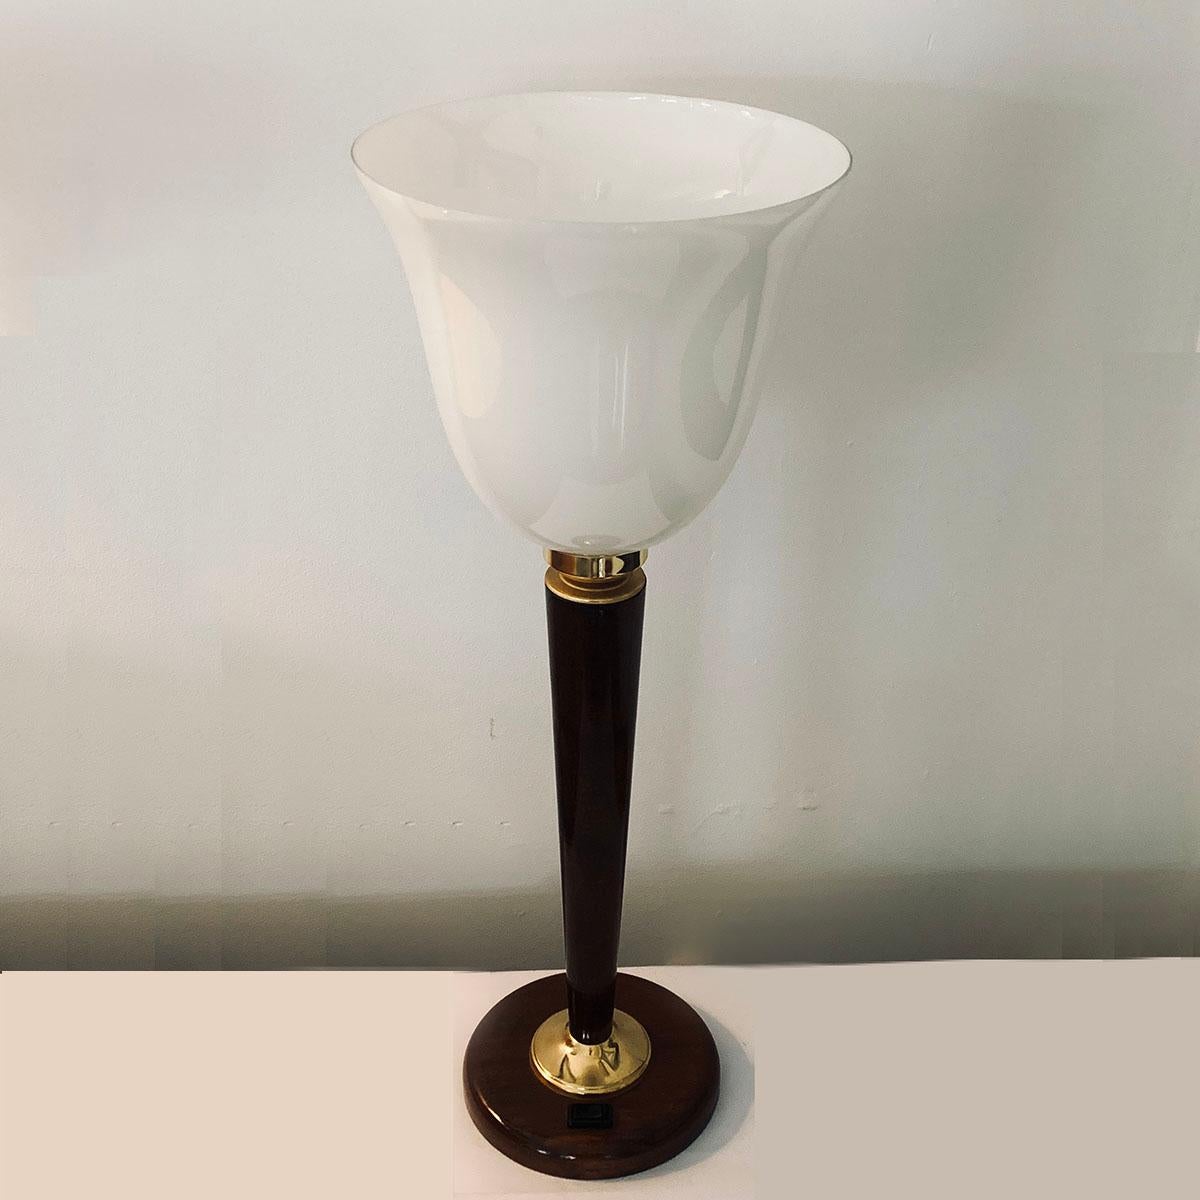 Art Deco French Mazda Lamp with Opalescent Shade In Good Condition For Sale In Daylesford, Victoria